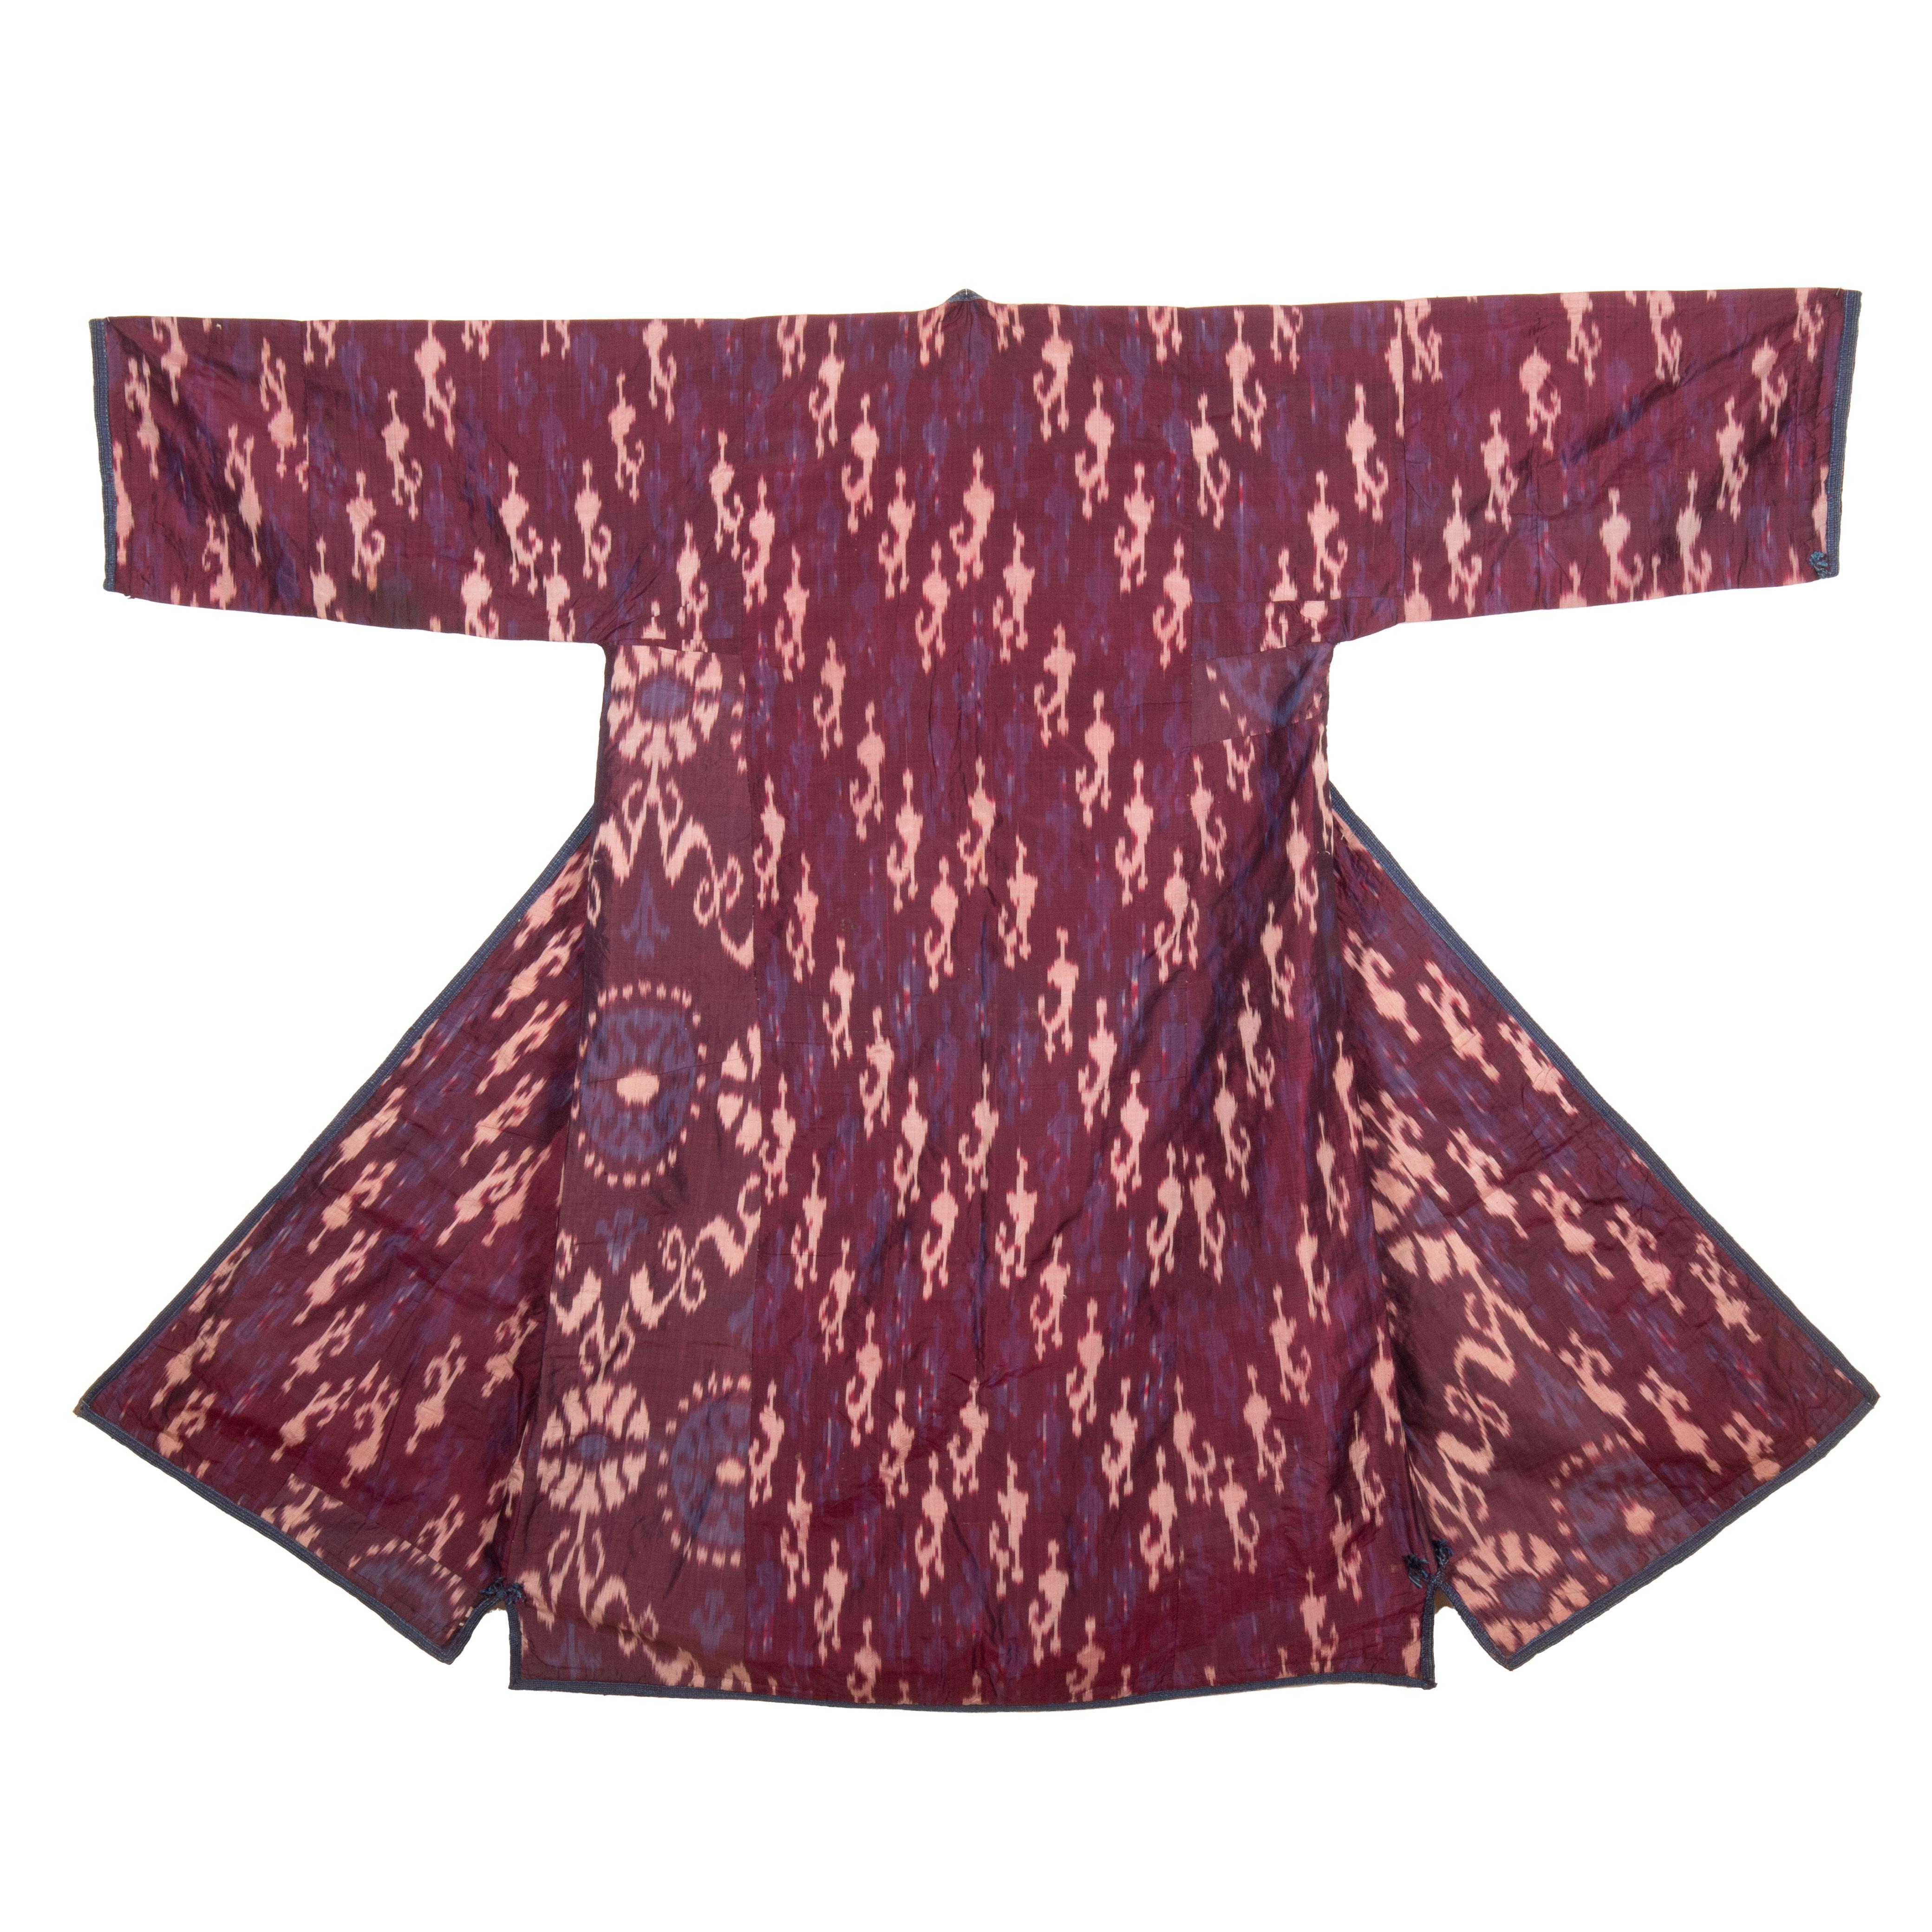 A Silk Ikat Chapan from Uzbekistan is a traditional robe or coat made of silk fabric, adorned with intricate ikat patterns. 